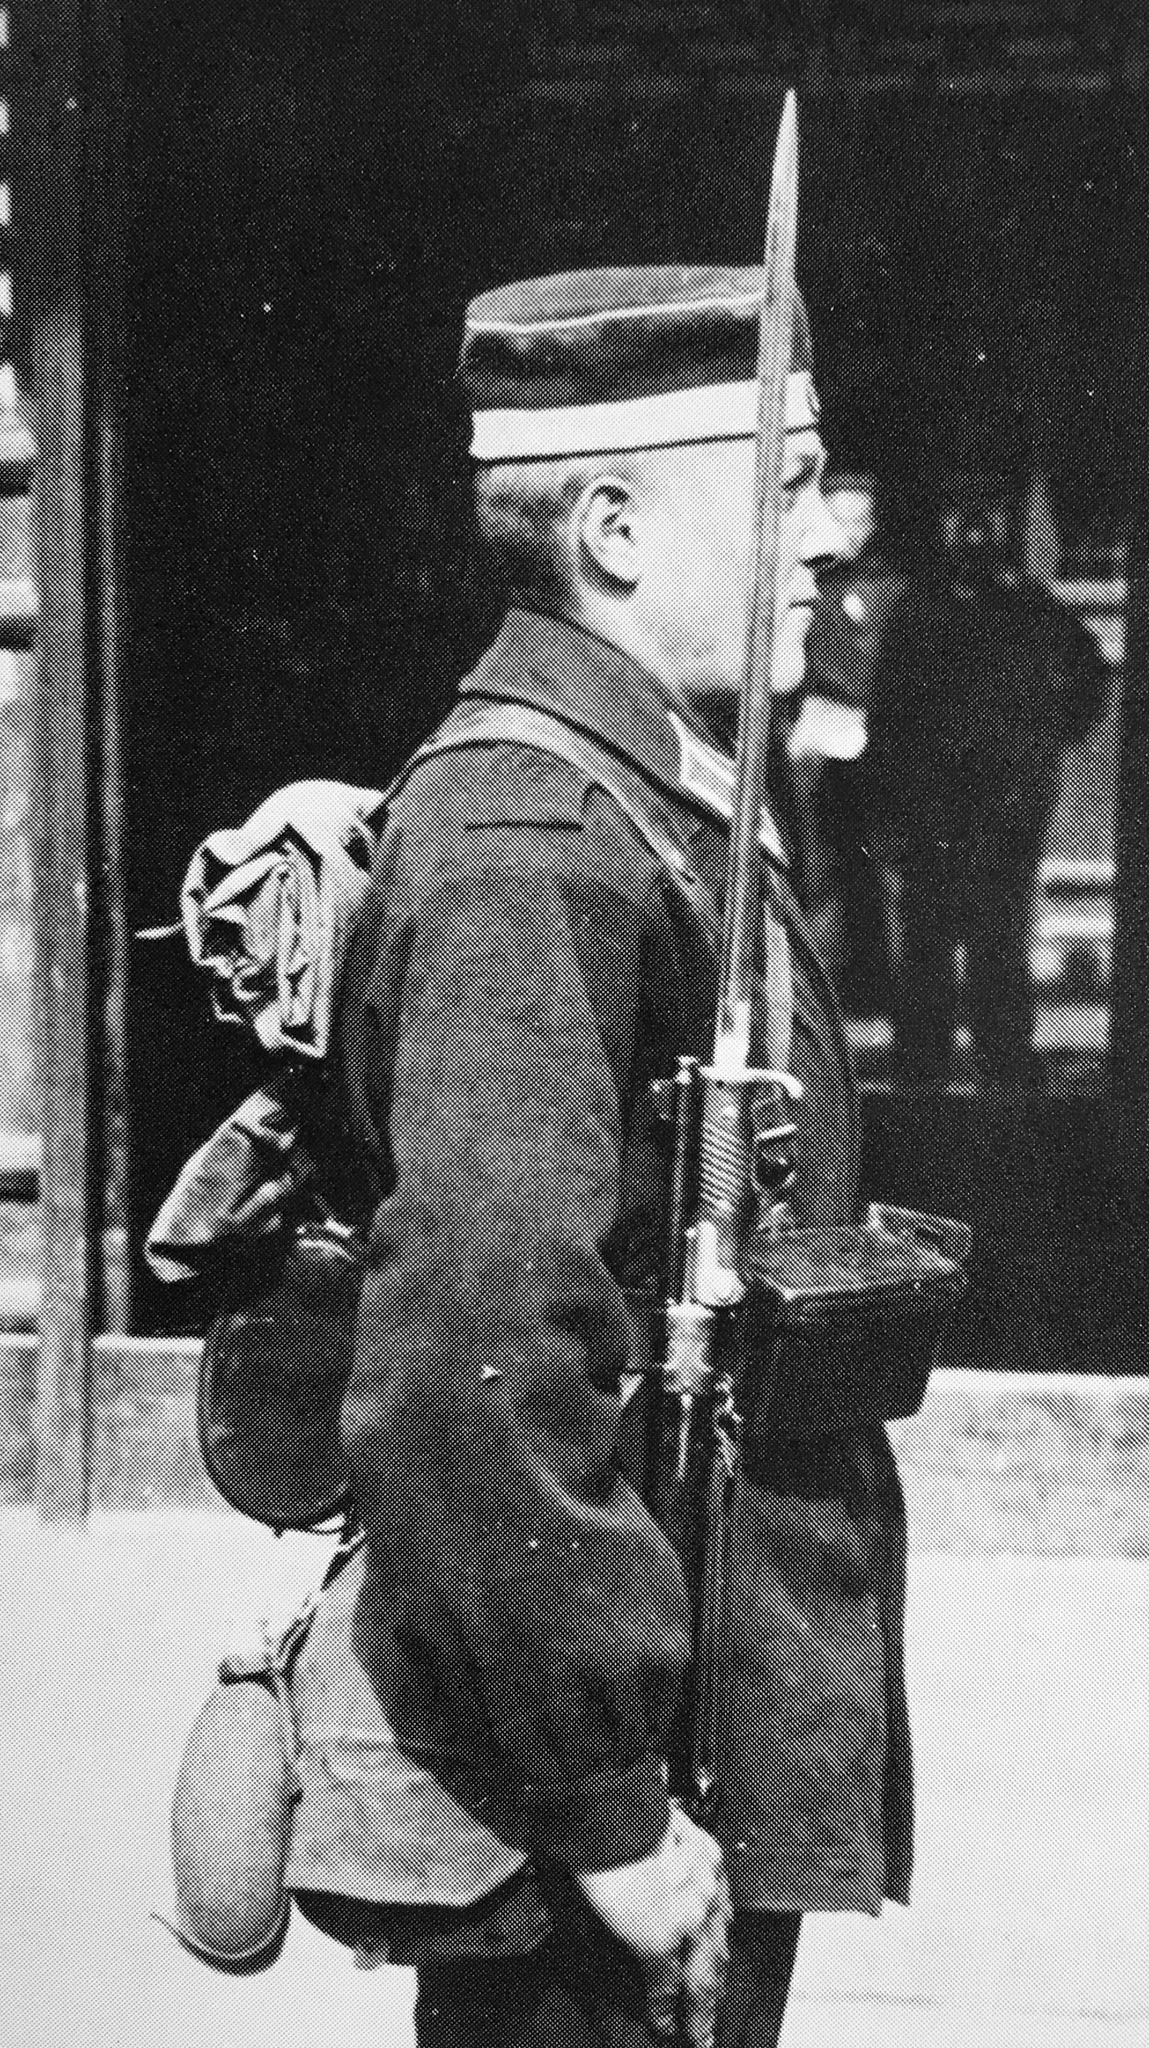 German expedition force in China with Mauser 98